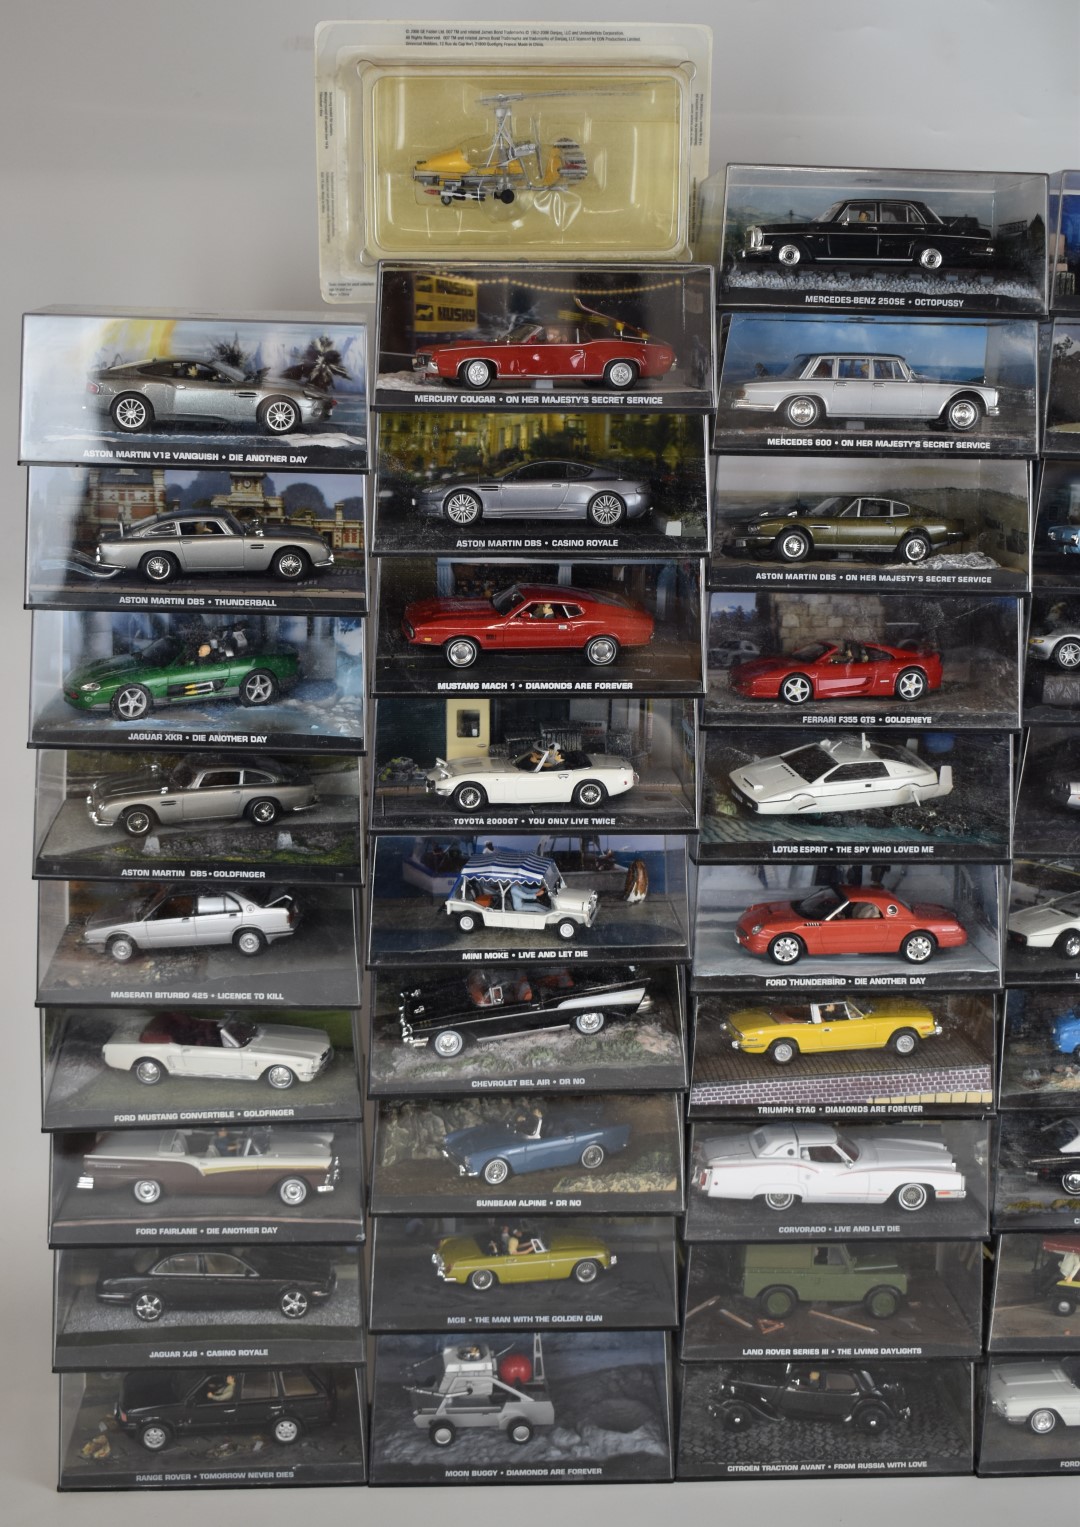 Forty-eight GE Fabbri 007 James Bond diecast model cars including vehicles from Goldfinger, The - Image 2 of 3